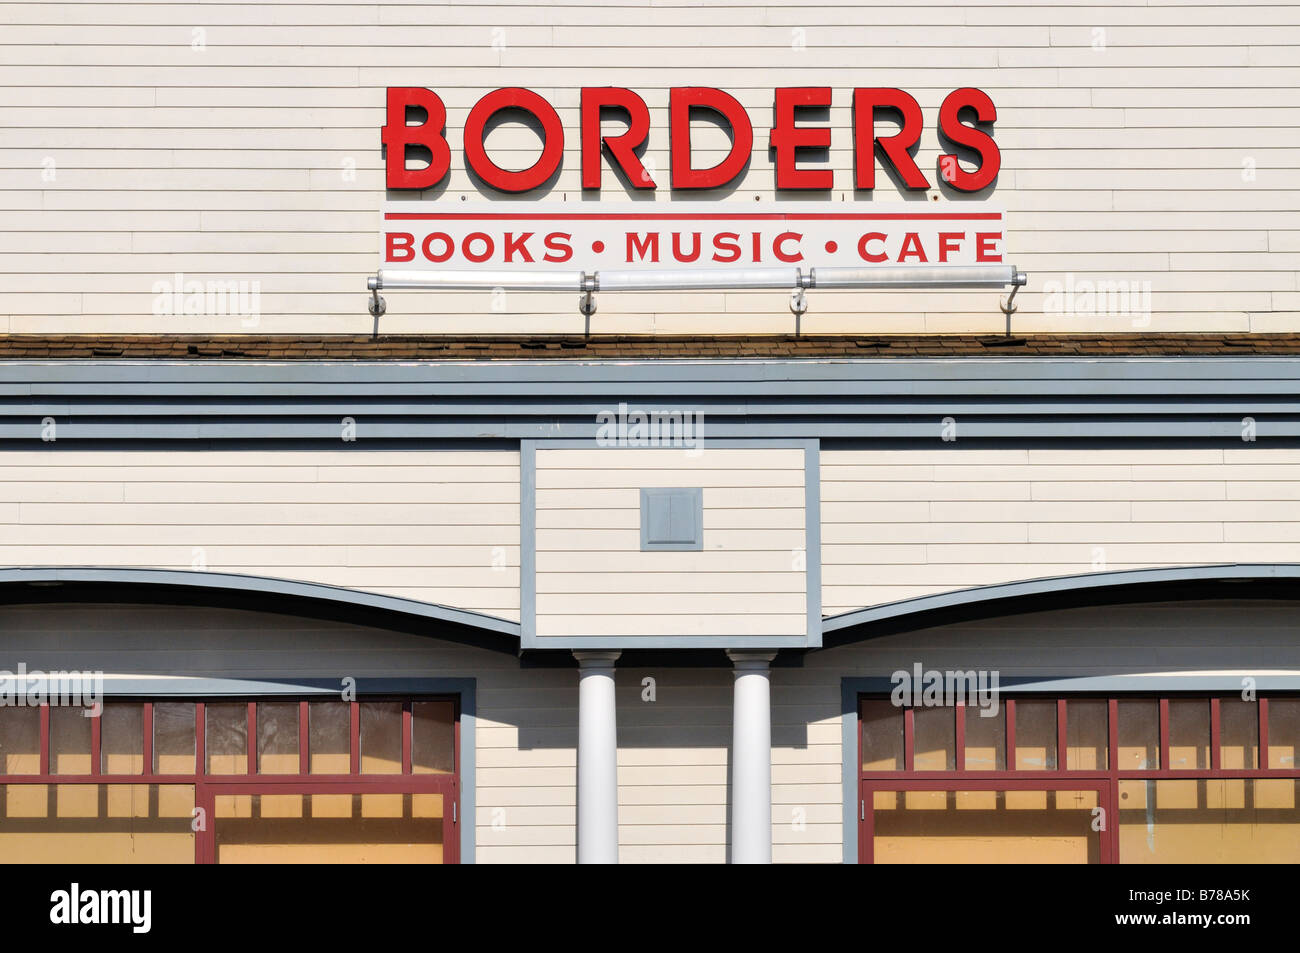 Borders Bookstore exterior sign for books music cafe Stock Photo